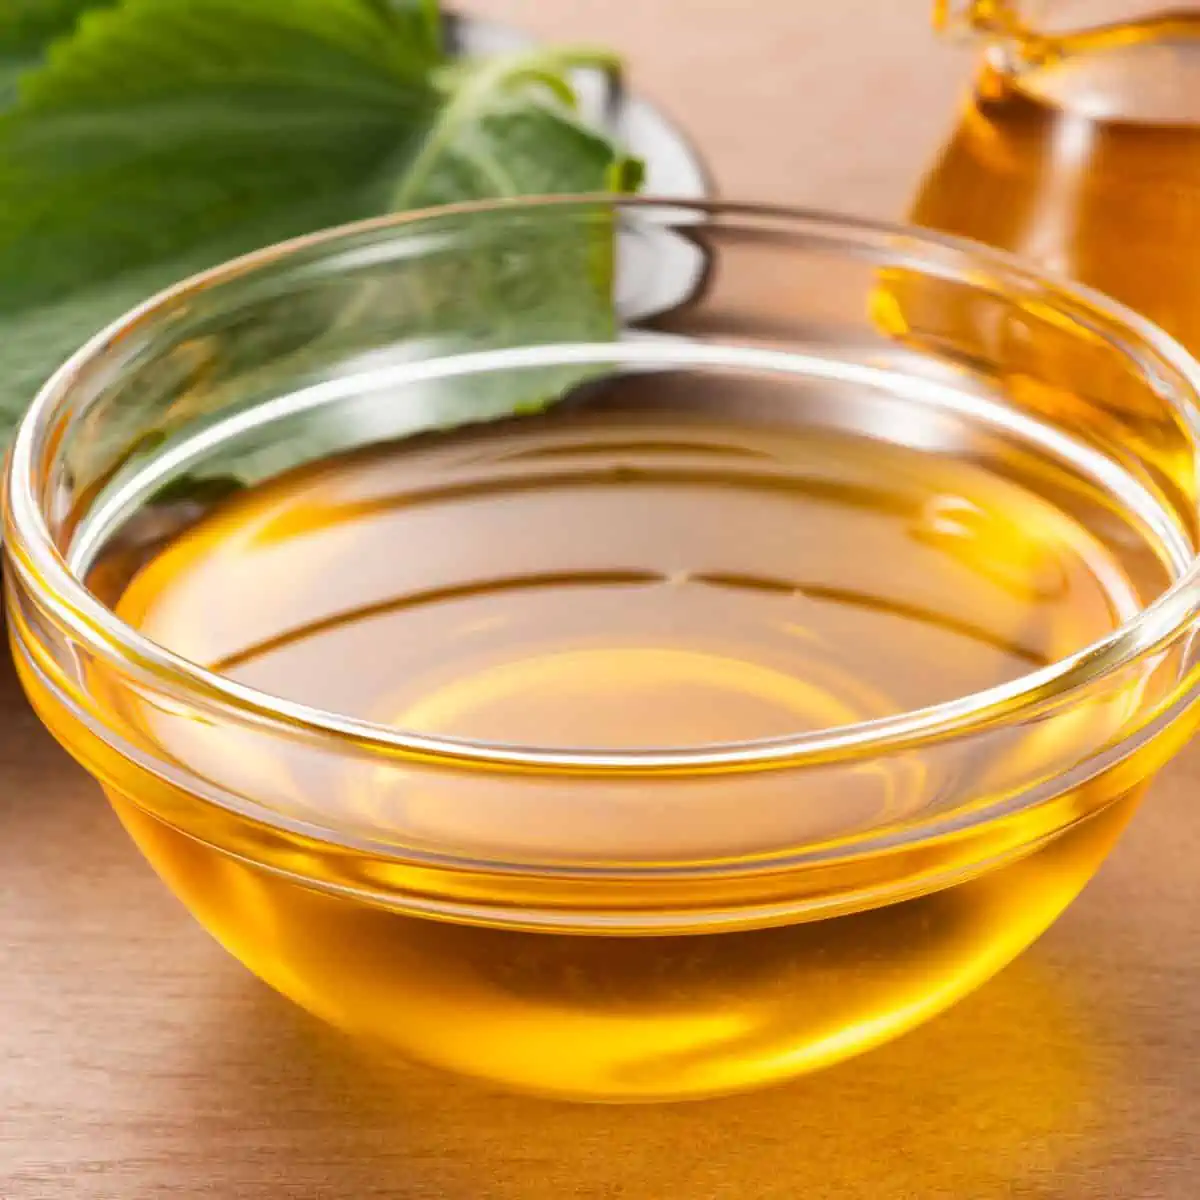 Vegetable oil in small glass bowl.
